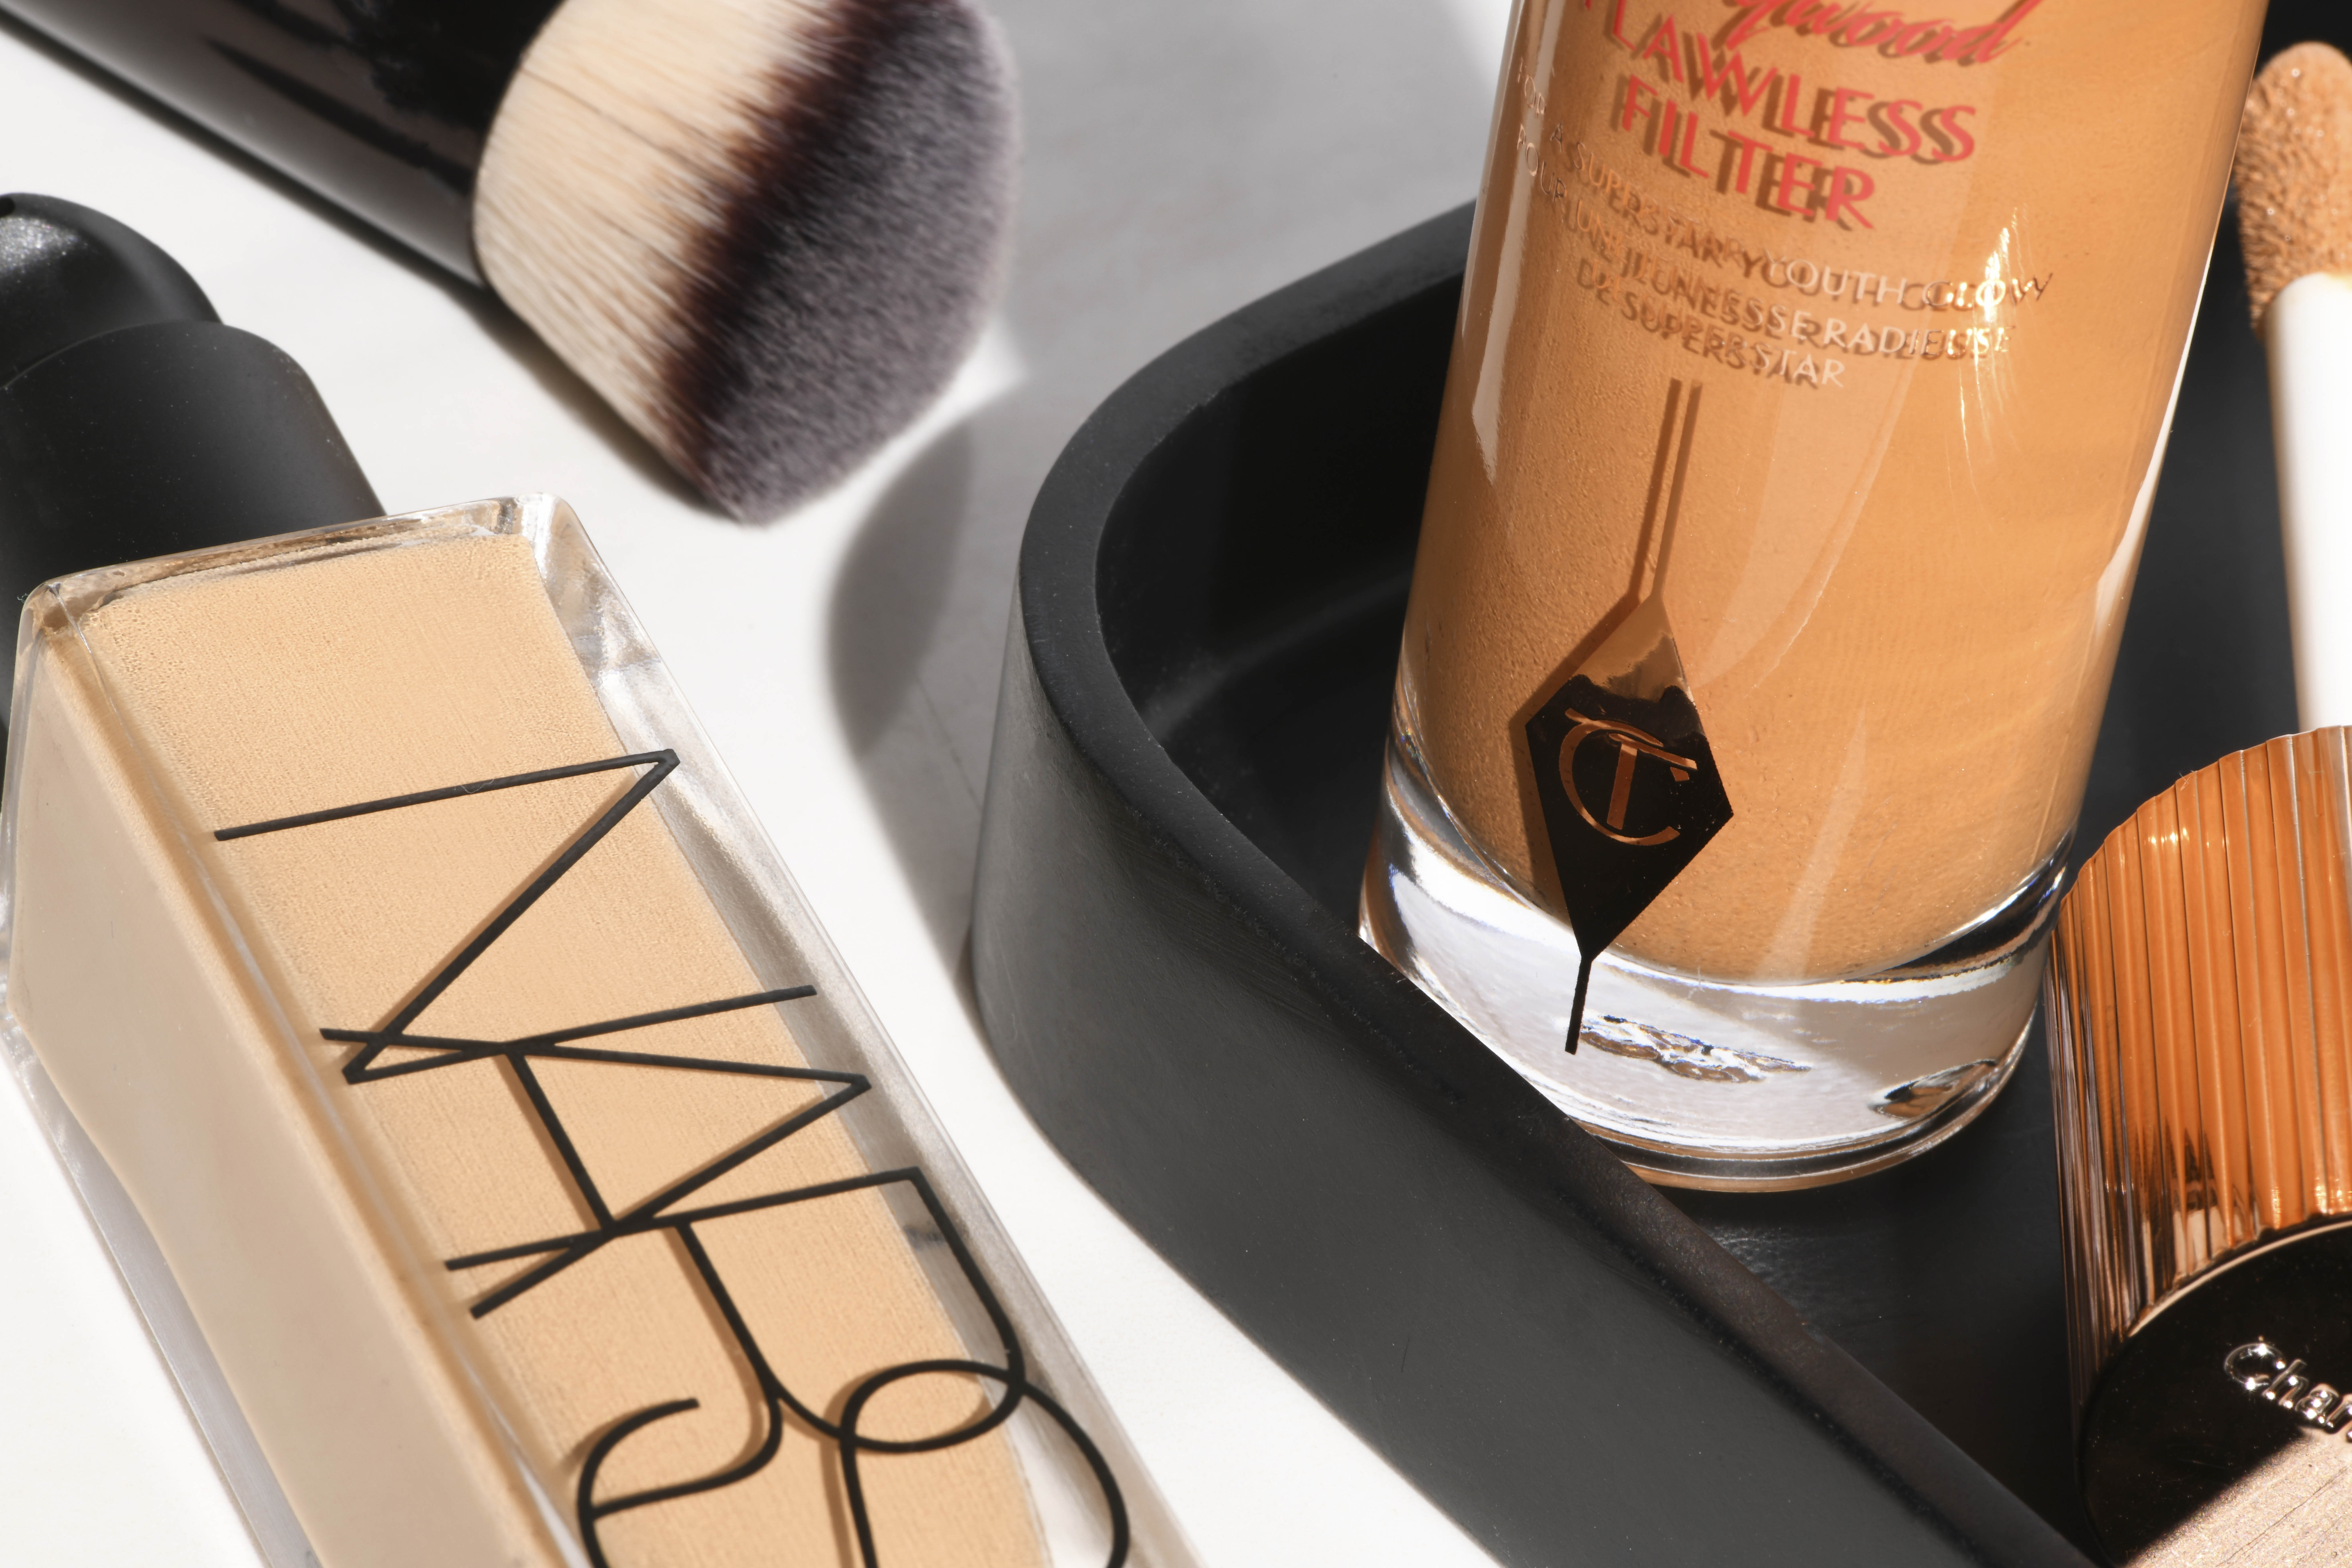 Charlotte Tilbury vs. NARS: Which Is Better For You?